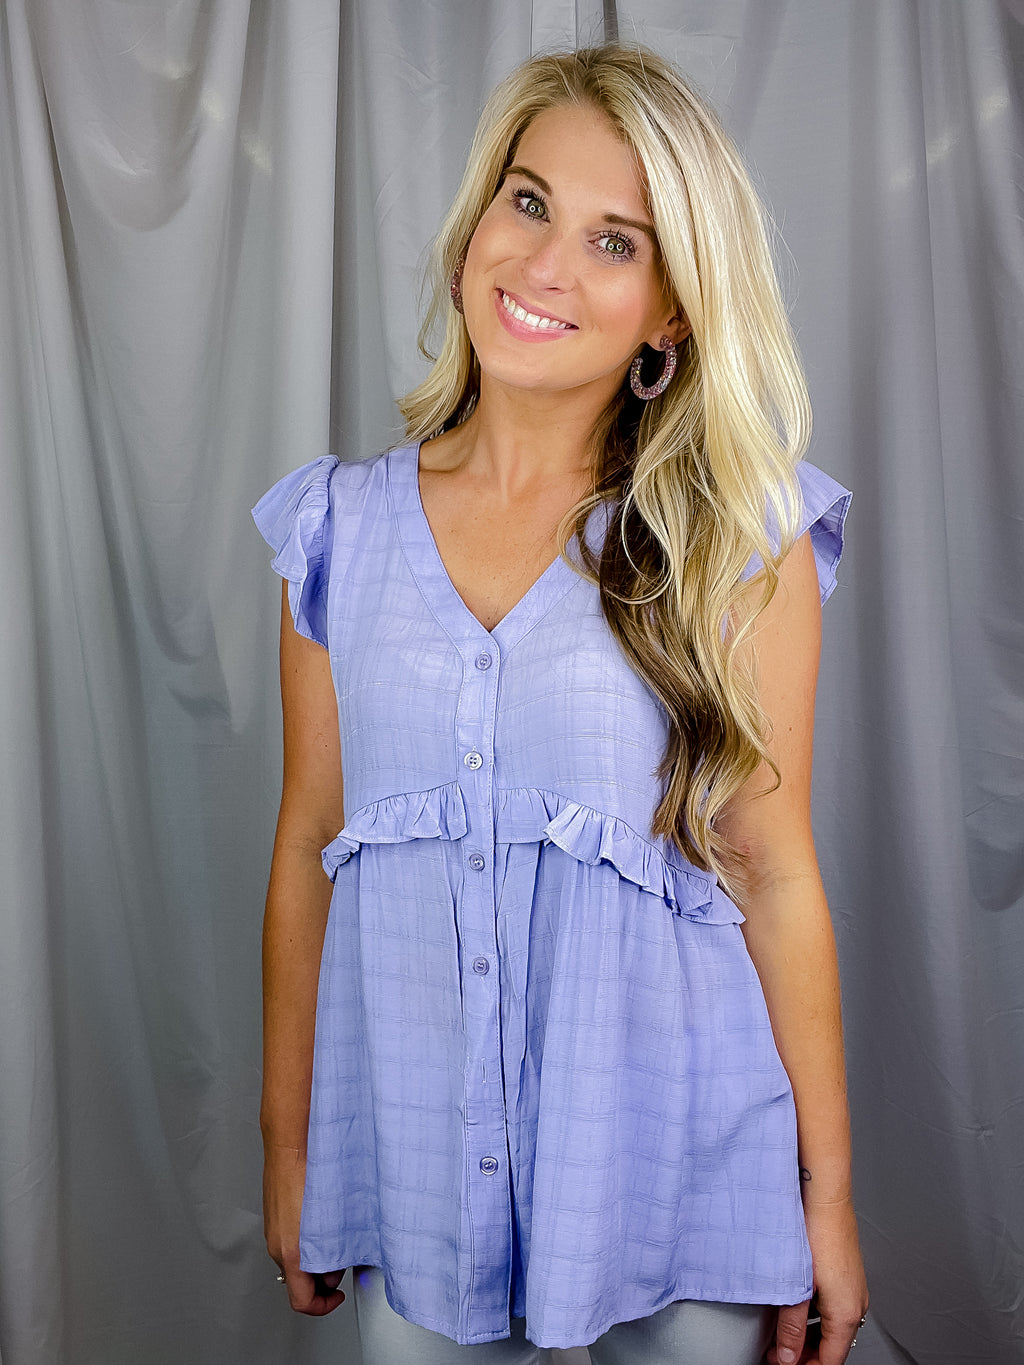 Top features a lilac color, textured detail, functional button down detail, V-neck line, short sleeves and runs true to size! 